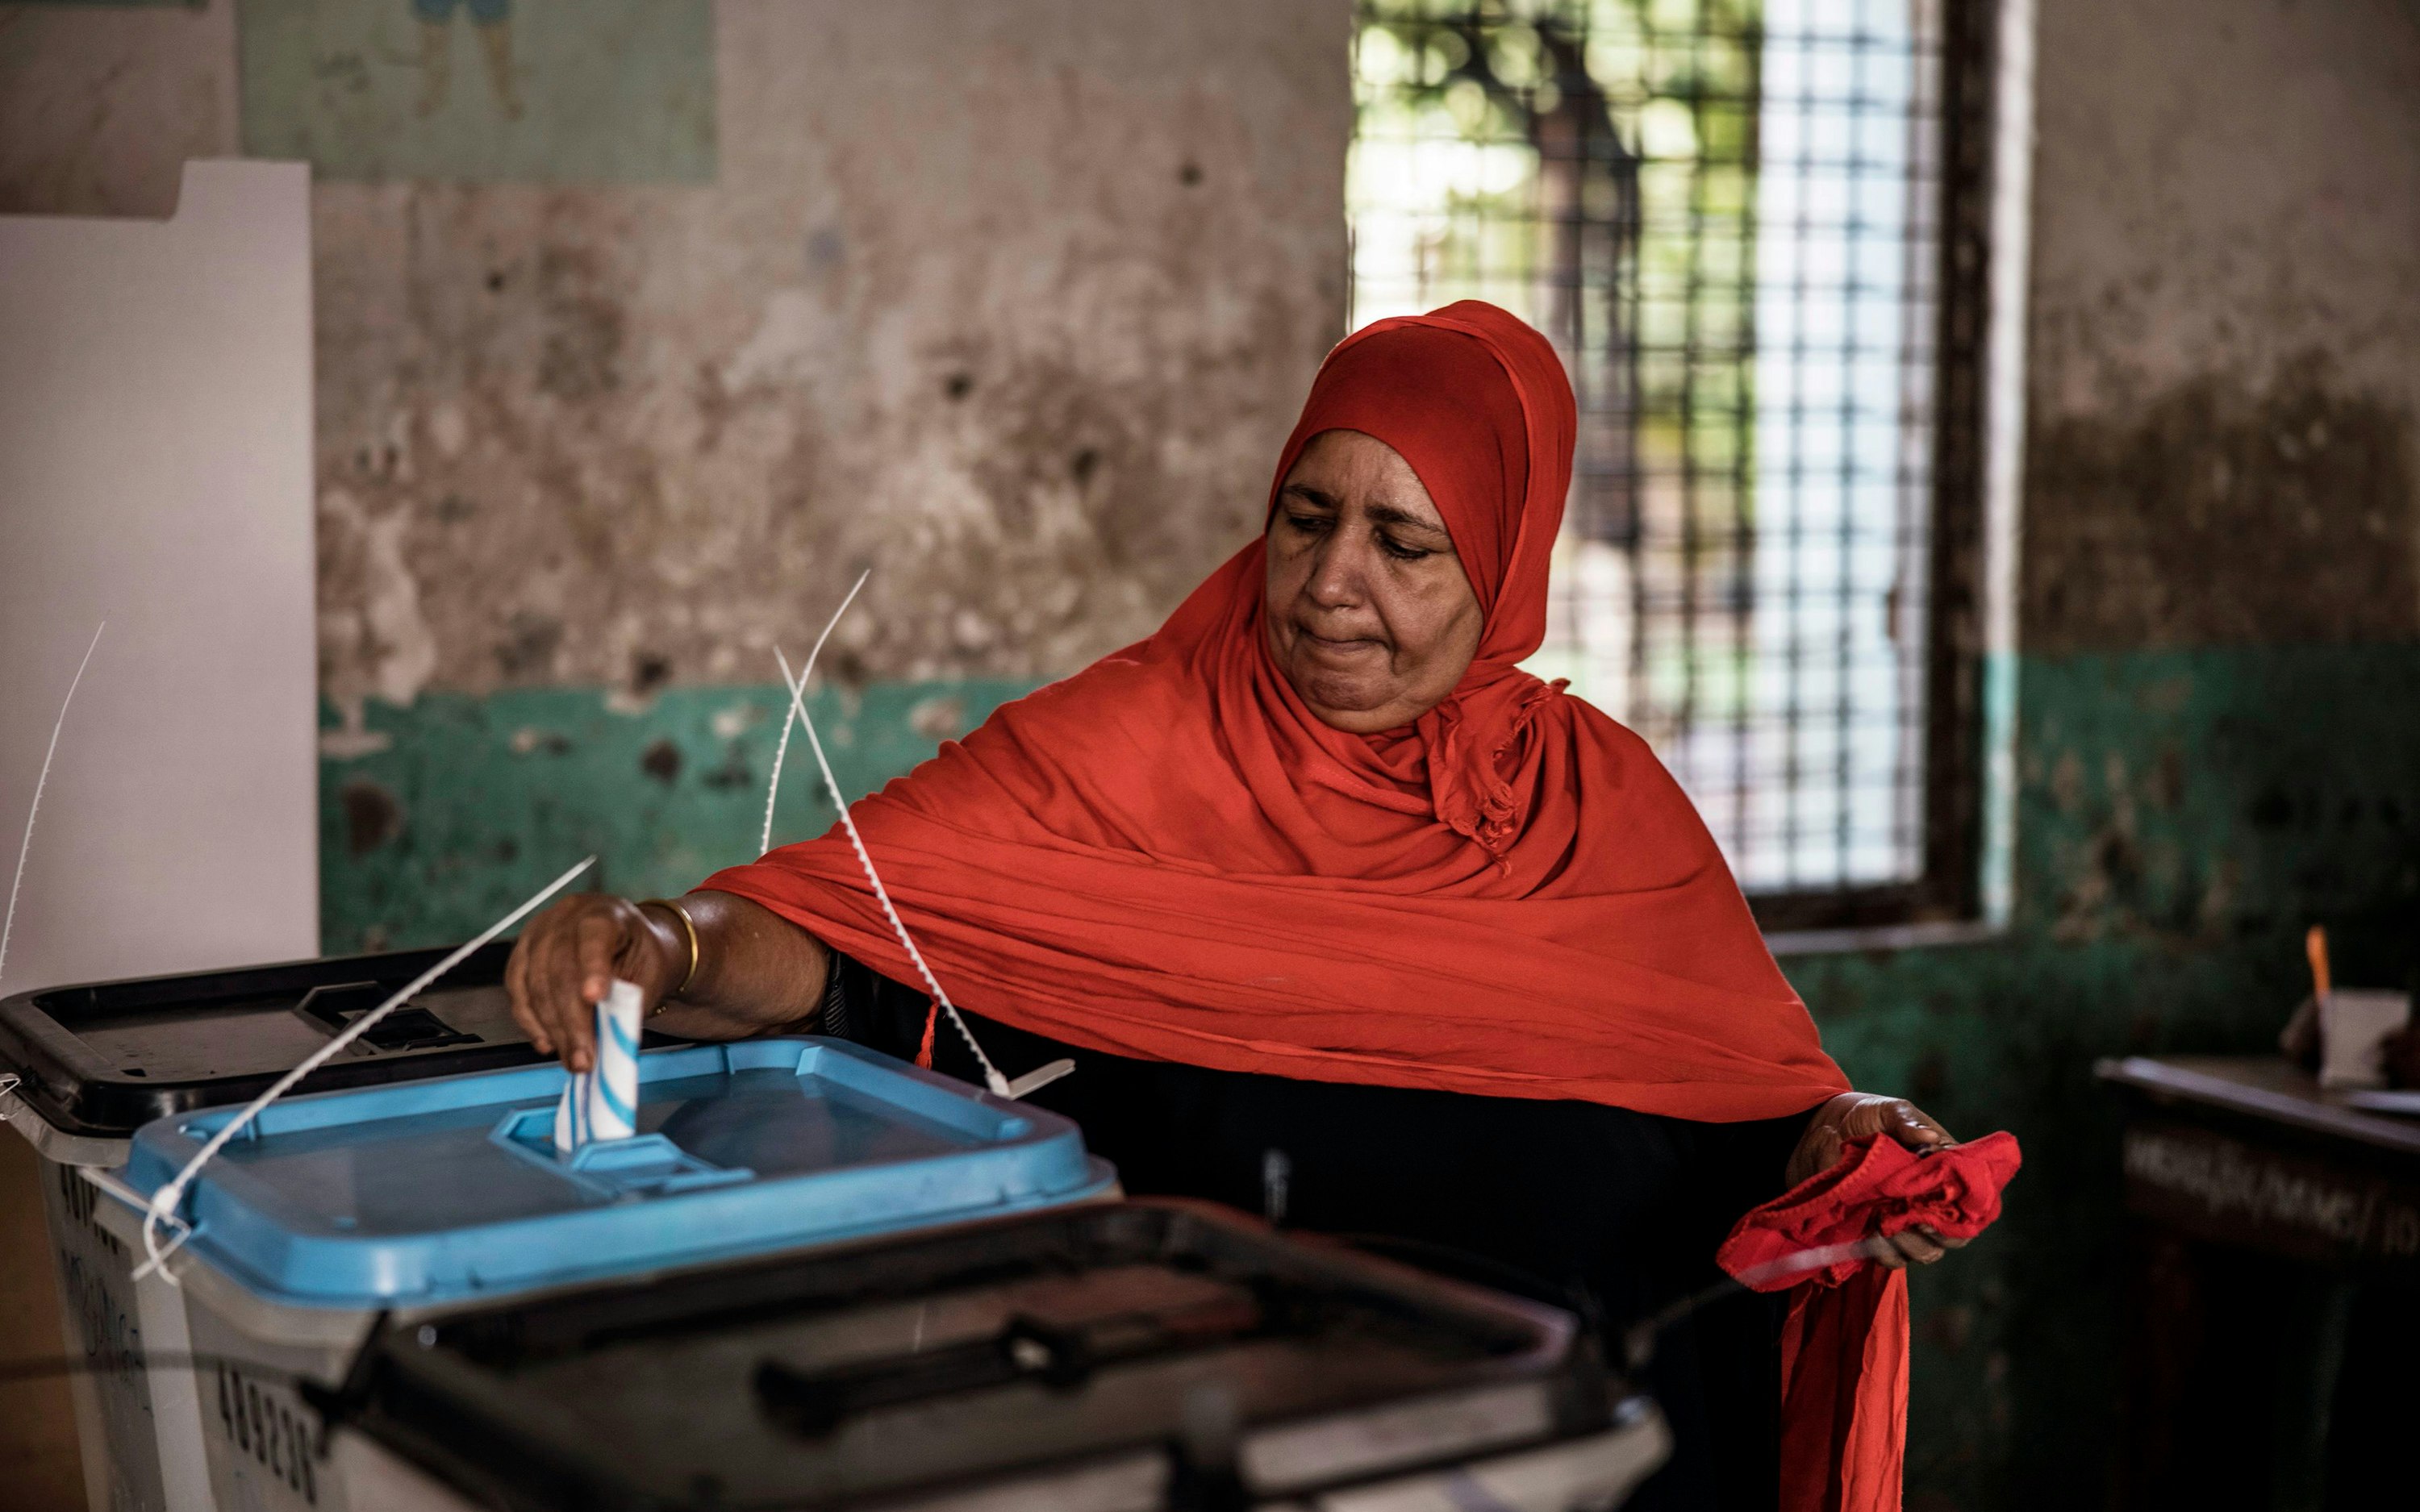 A woman casts her ballot at a polling station in Stone Town, Zanzibar